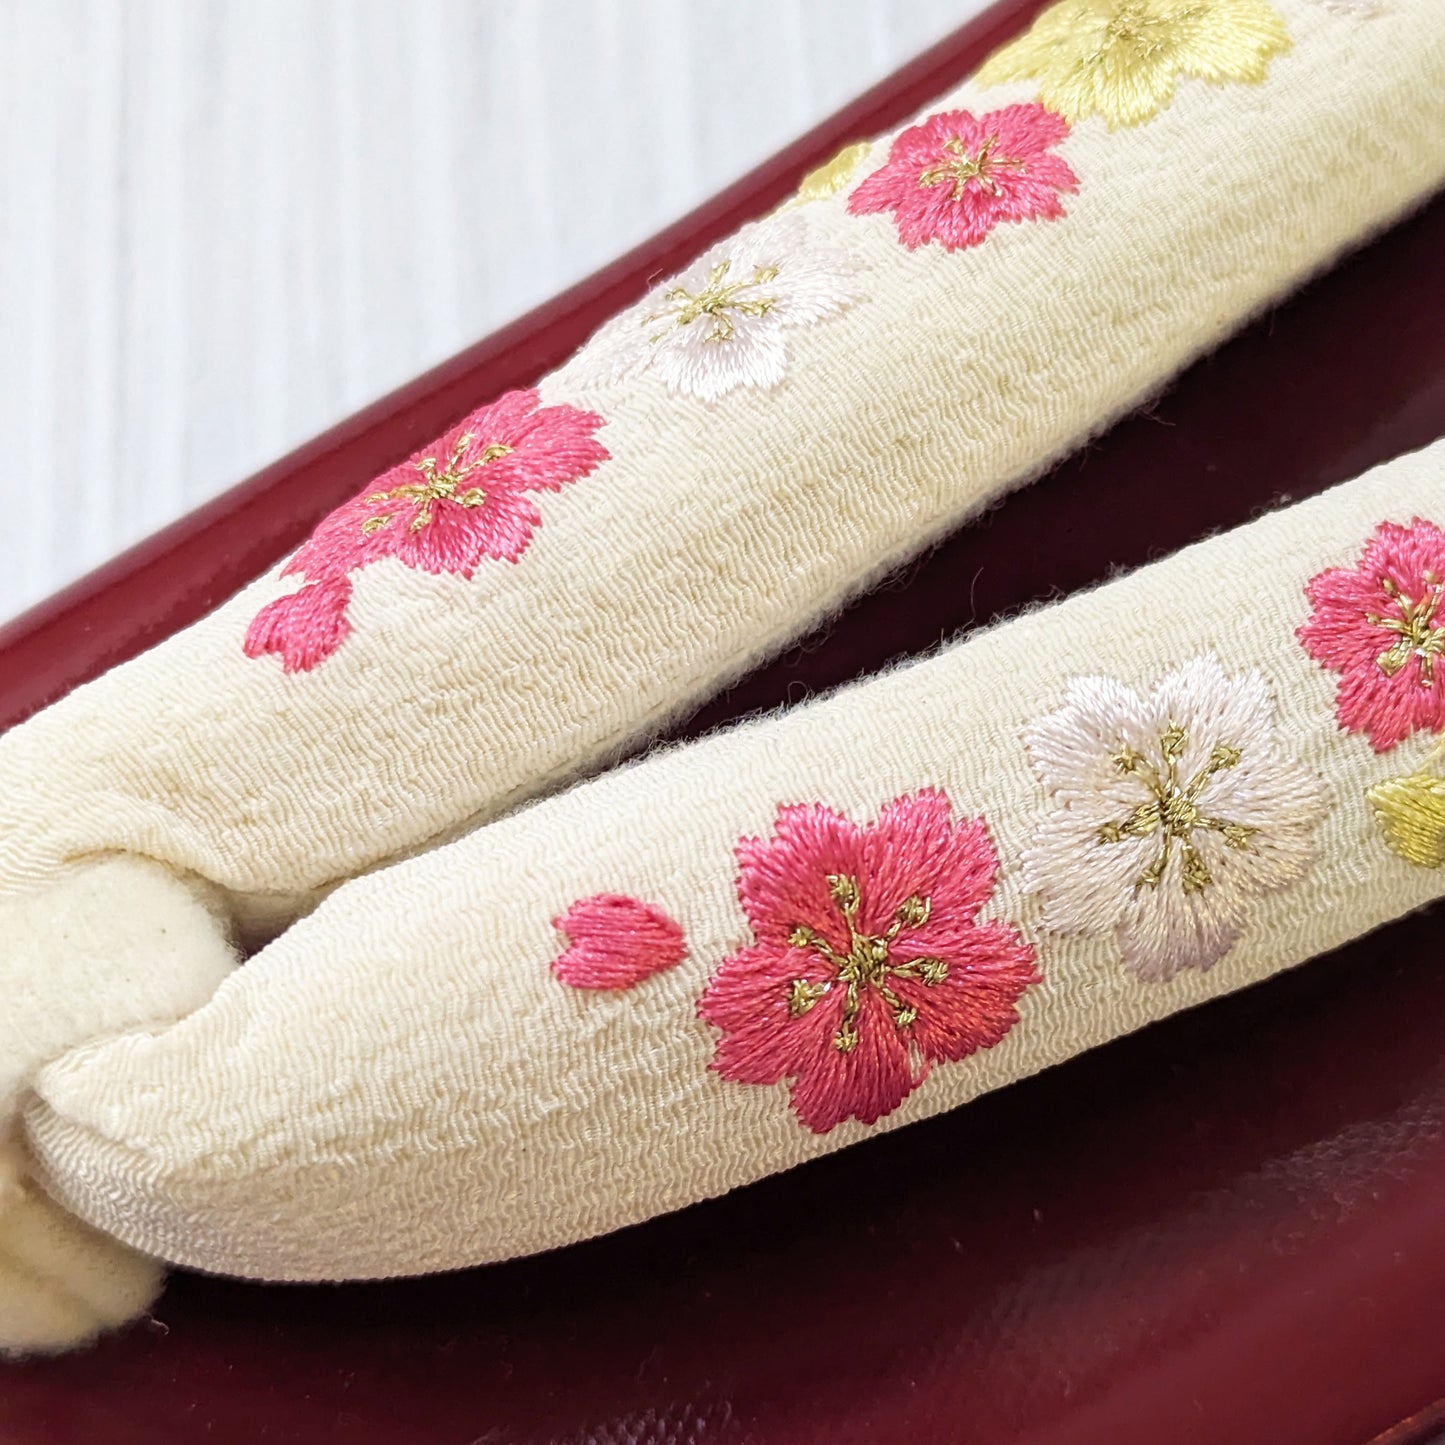 Japanese Traditional Zori Sandals - Cherry Blossoms Embroidery Maroon